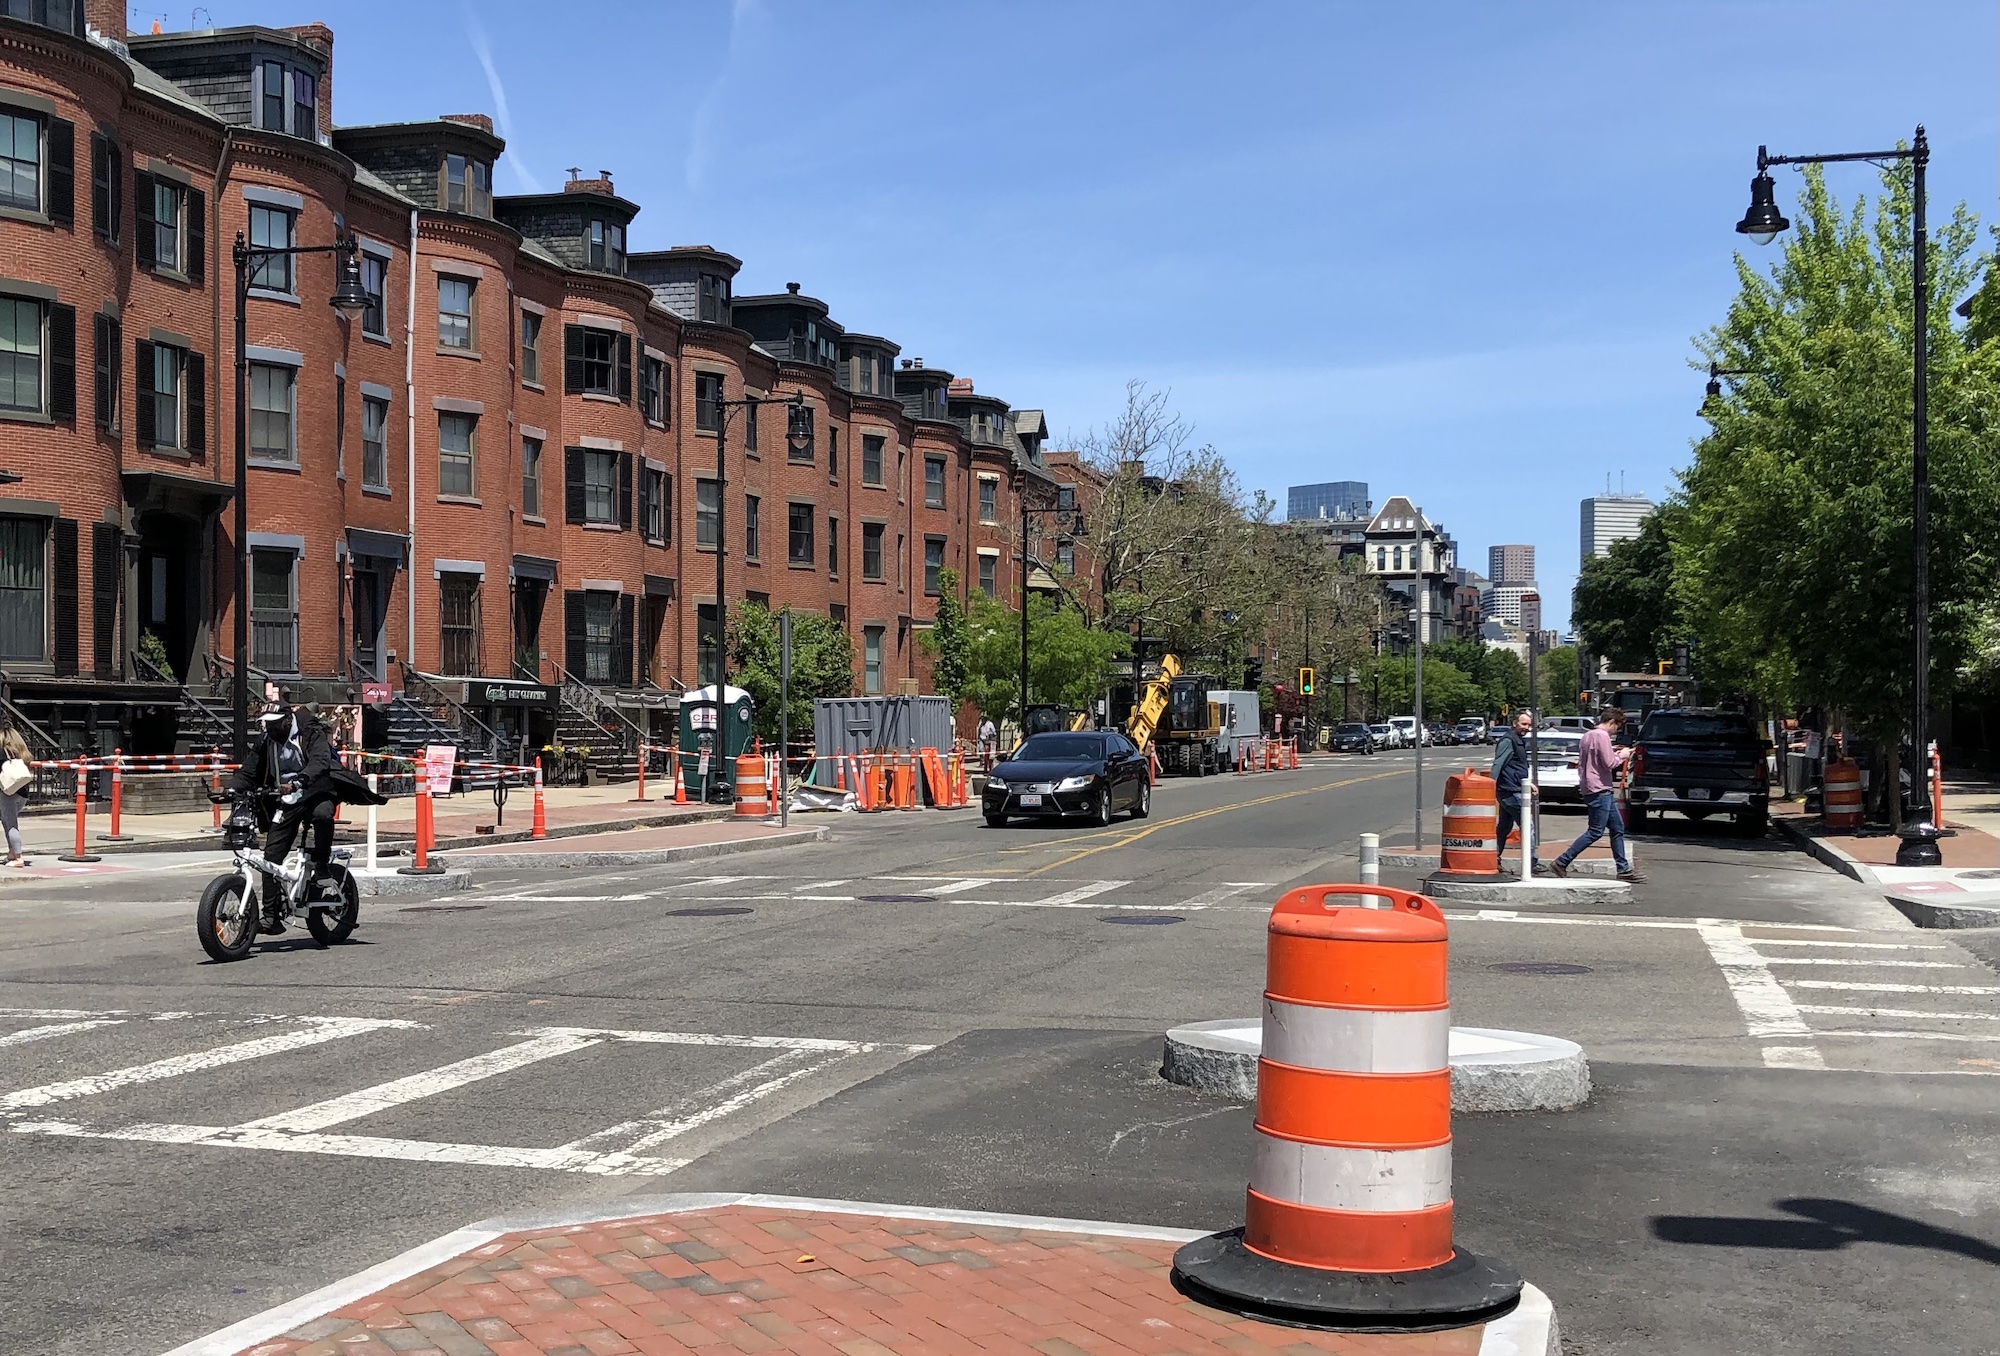 Tremont Street in the South End. In the right foreground is a newly-installed median island paved in bricks and ringed by a granite curb and topped with an orange construction barrel. In the background a pedestrian crosses the street among more construction barrels. On the right, a bicycle rider passes in the opposite lane. Historic brick rowhomes line both sides of the street.